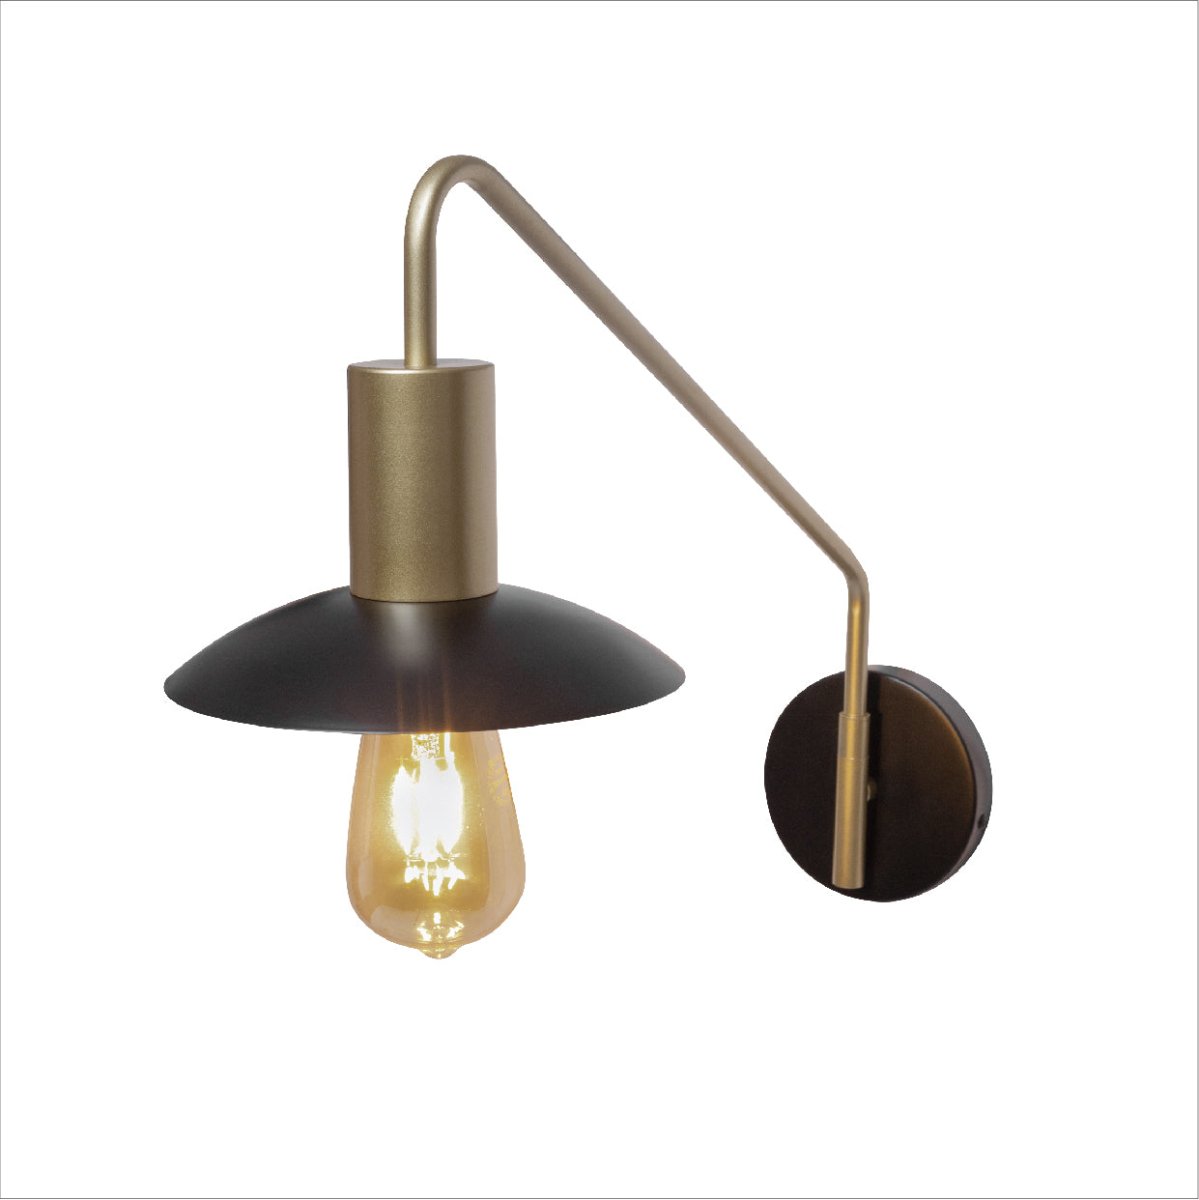 Main image of Black Gold Metal Flat Wall Light with E27 Fitting | TEKLED 151-19624